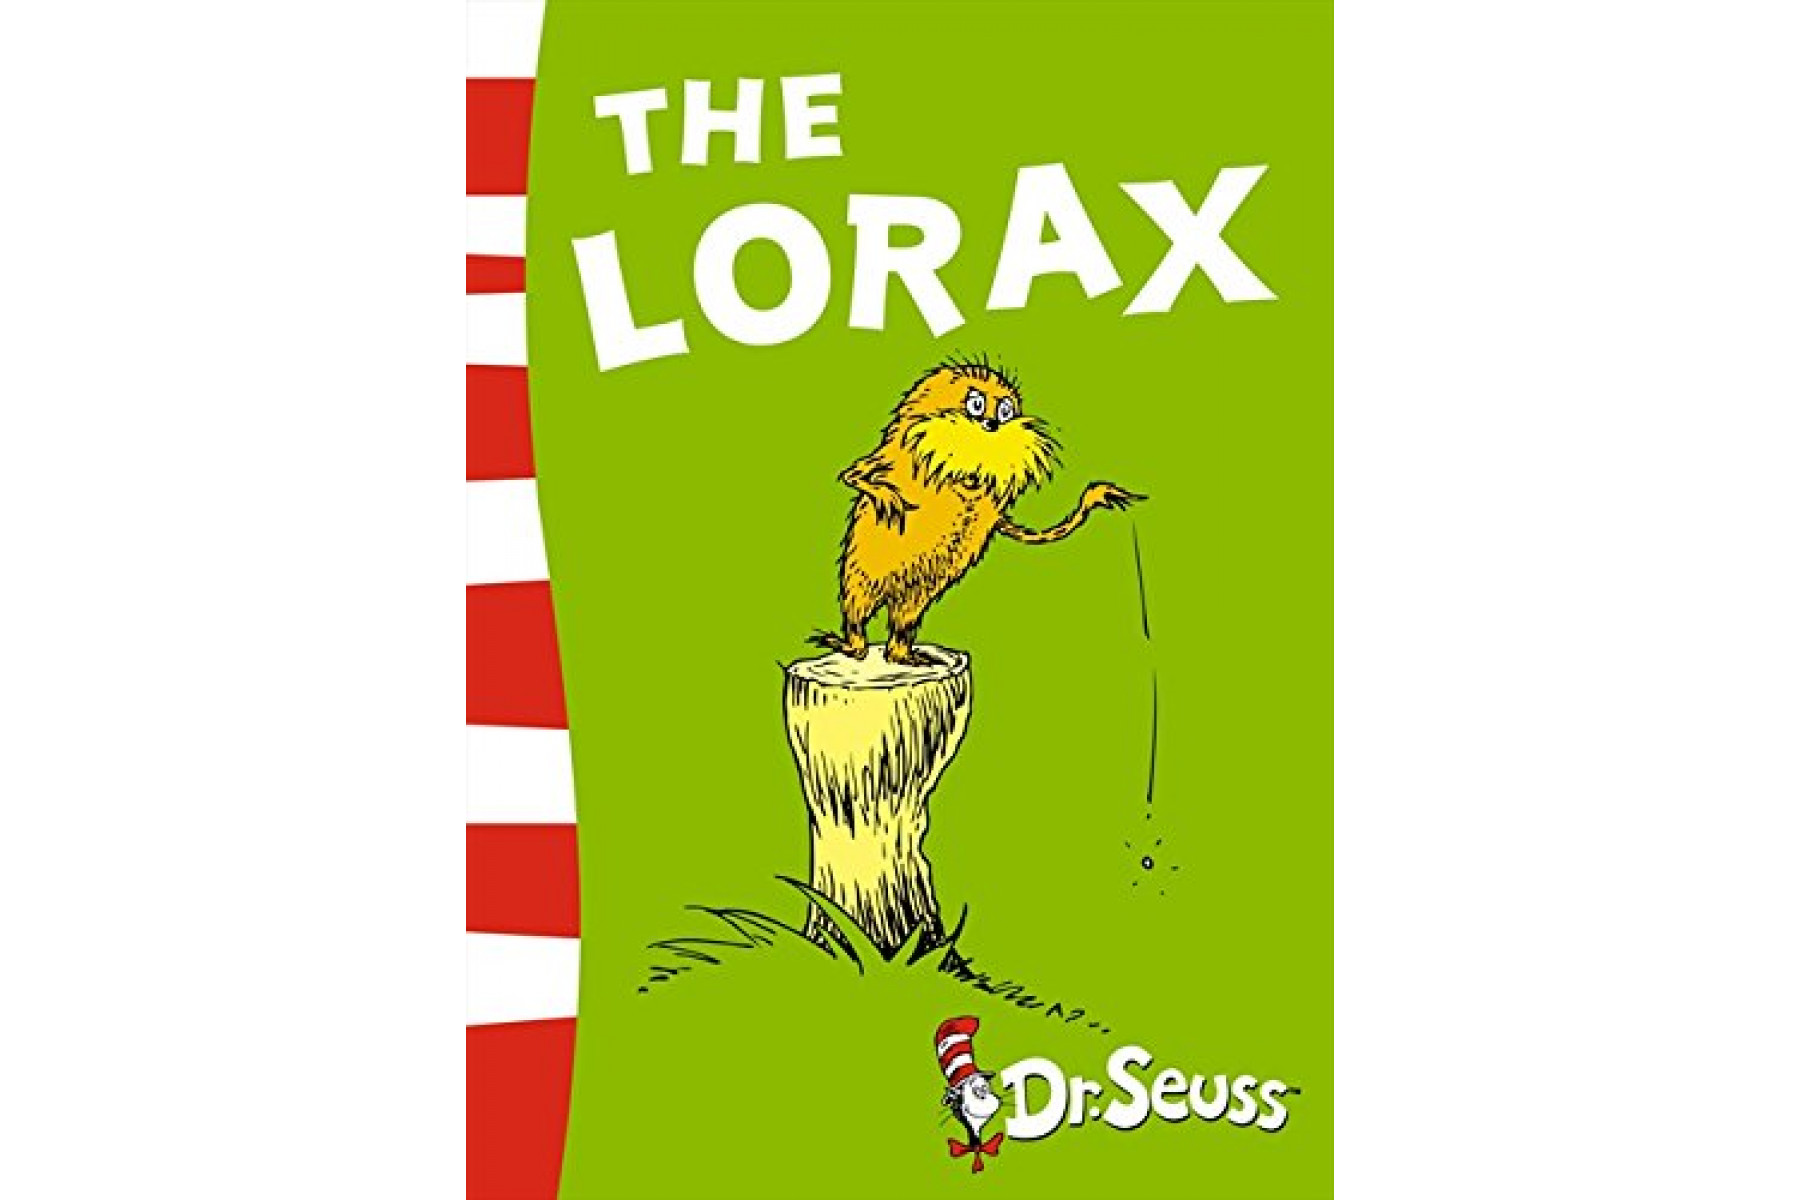 The Lorax (Dr Seuss - Yellow Back Book)